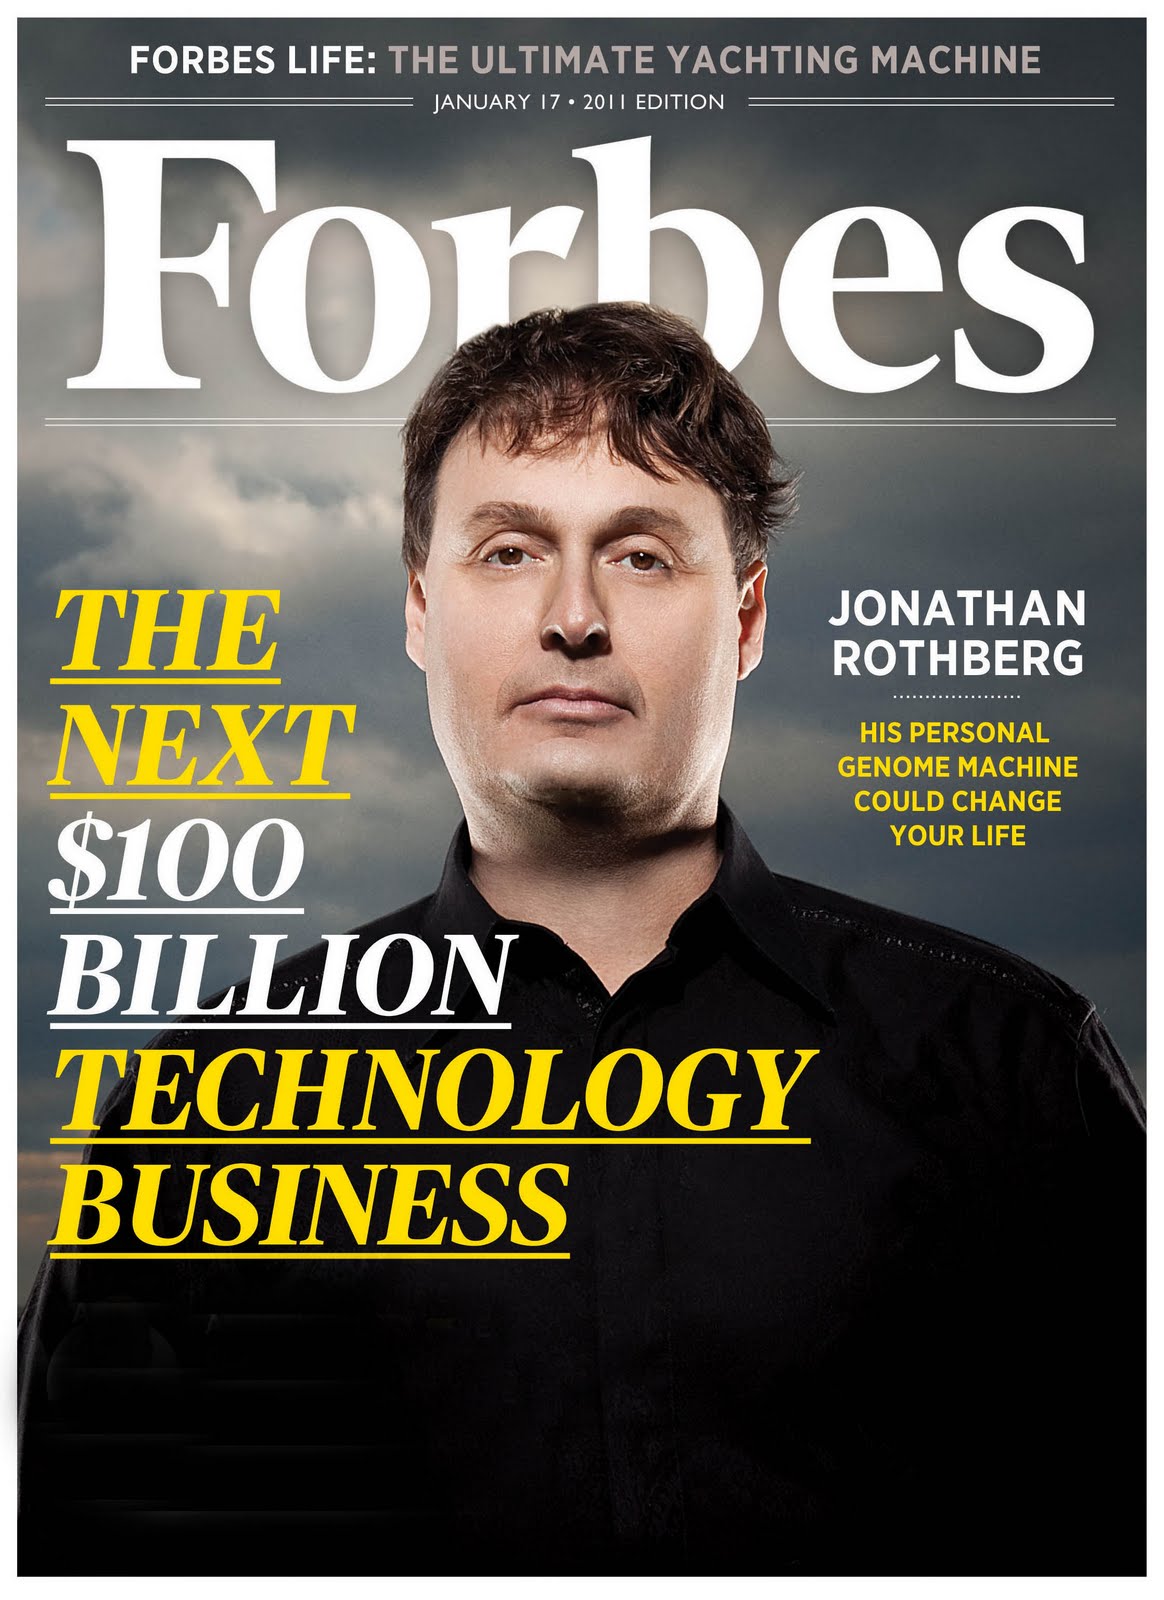 Forbes_cover011711.jpg